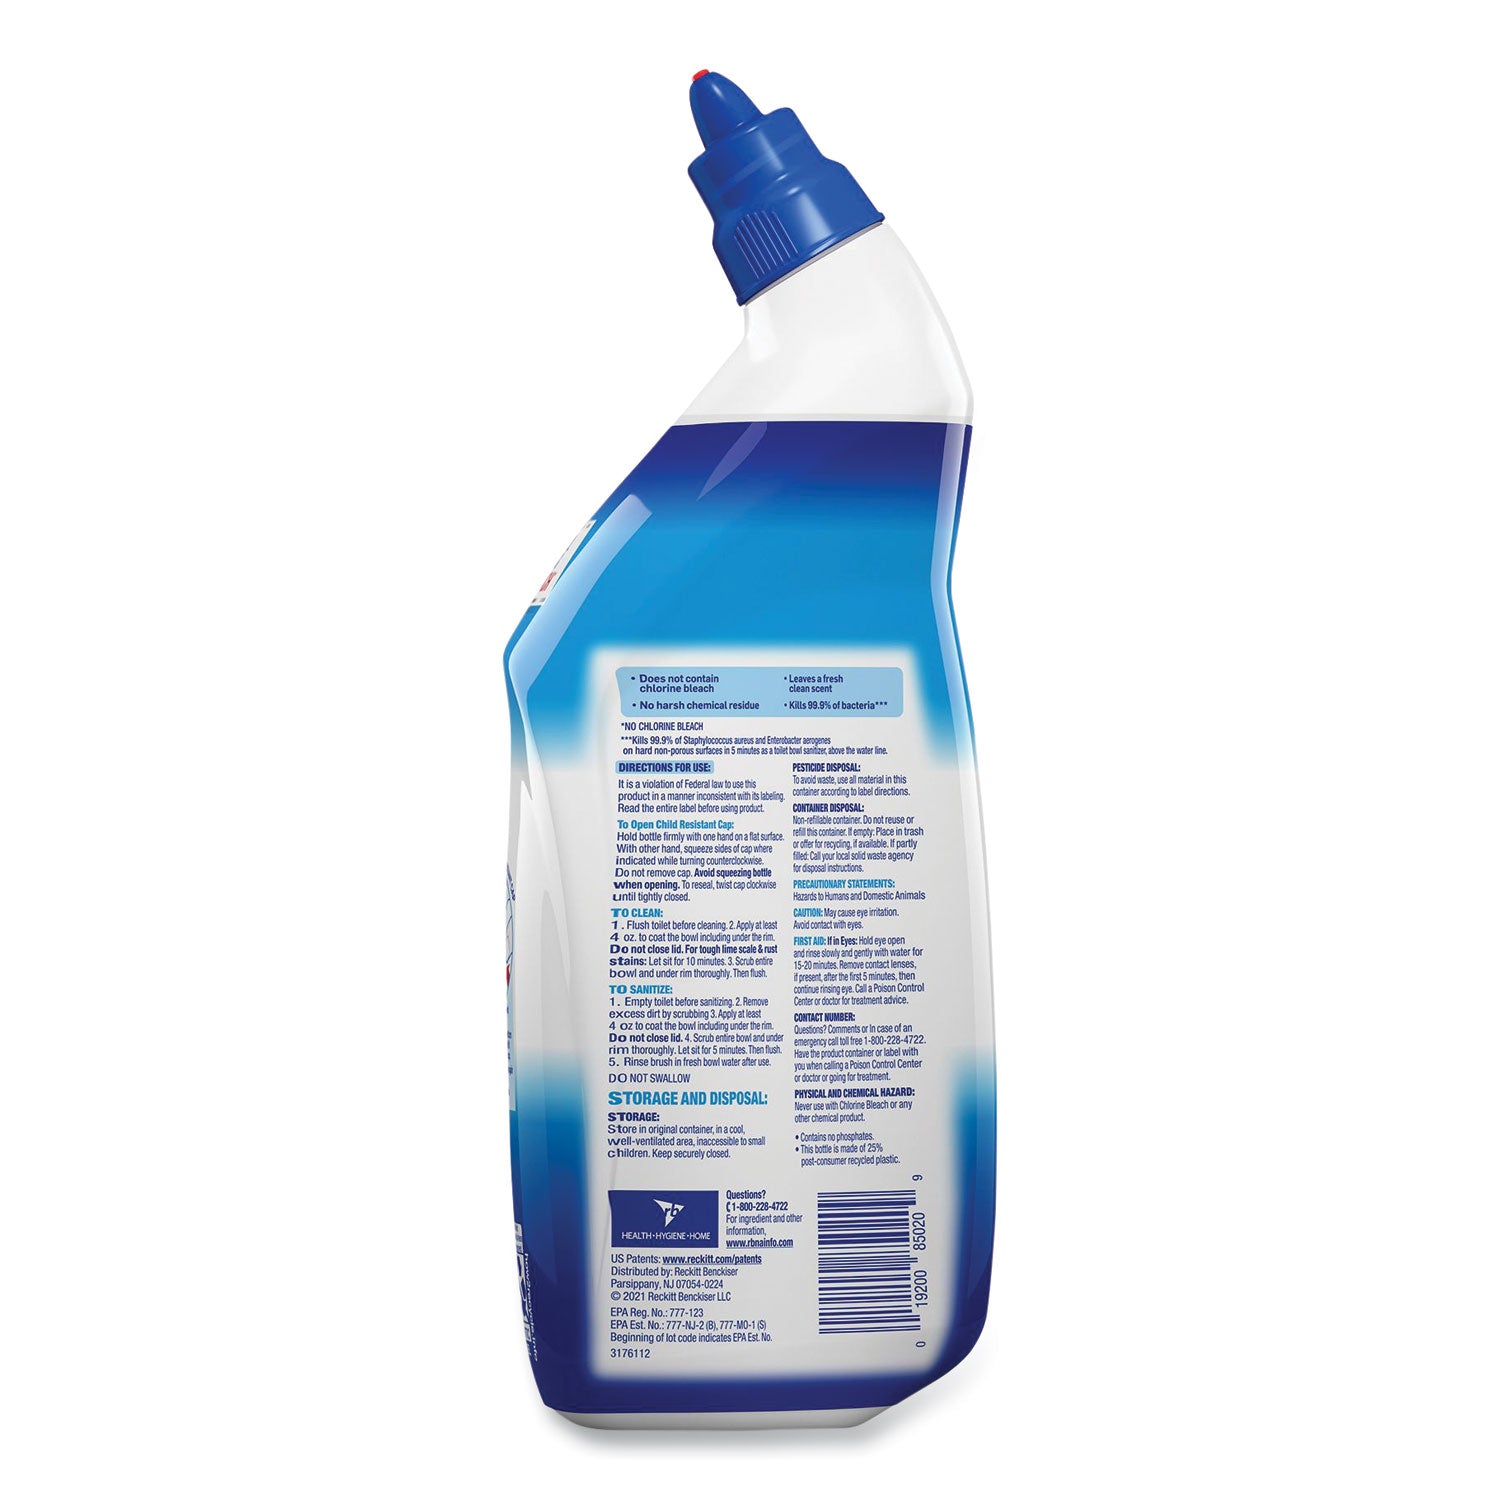 toilet-bowl-cleaner-with-hydrogen-peroxide-ocean-fresh-scent-24-oz_rac98011ea - 4